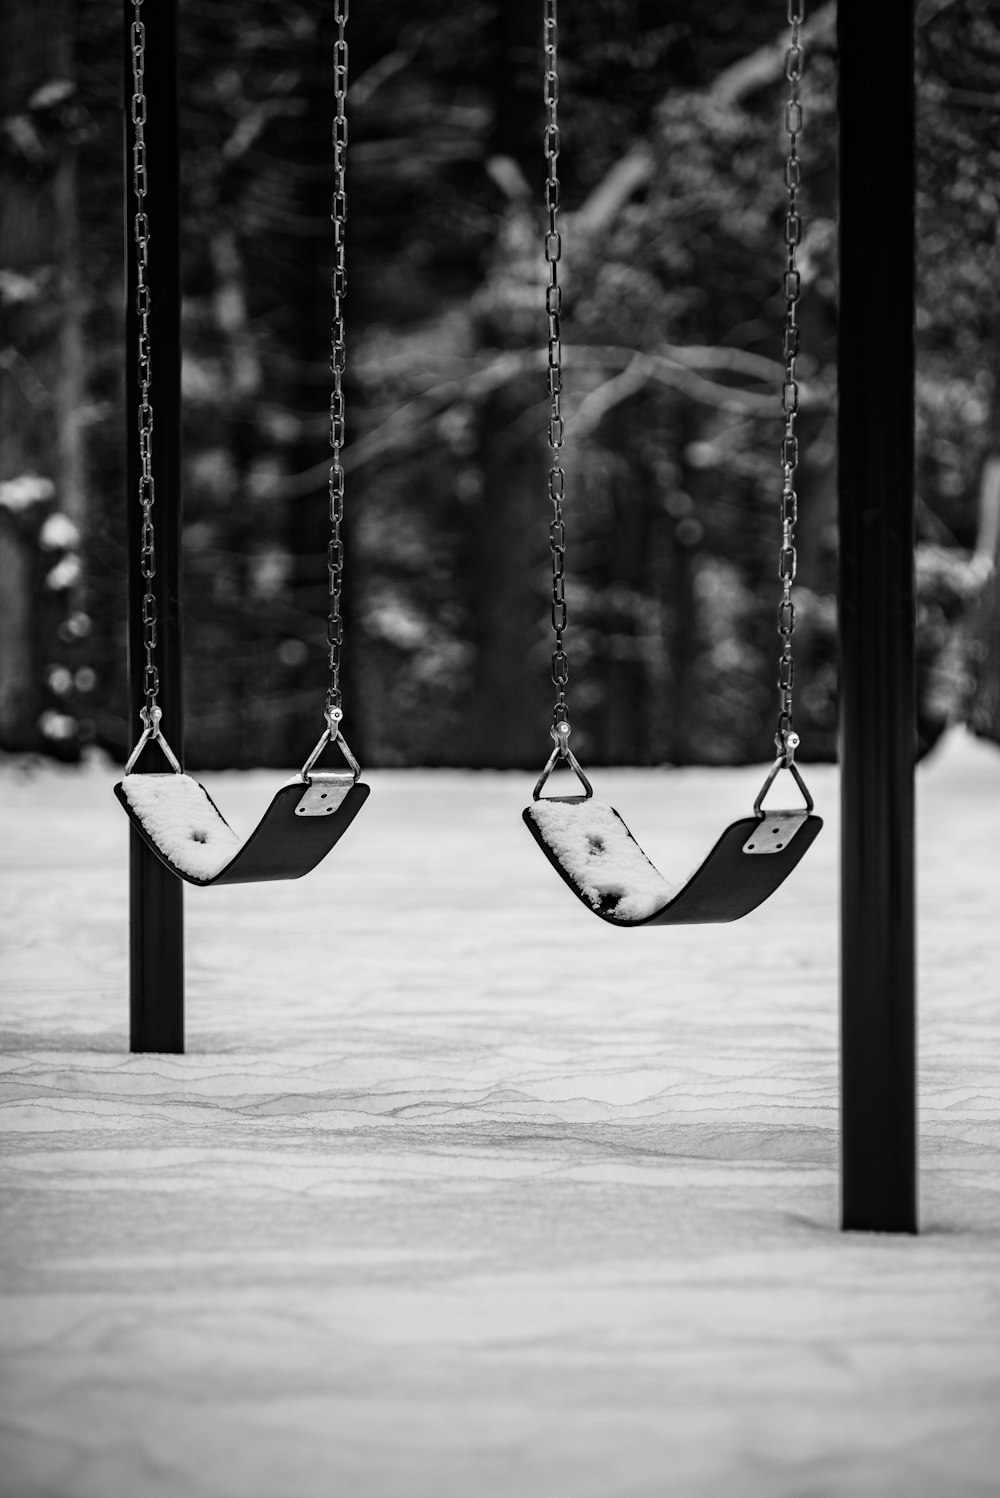 two swings with chain handles